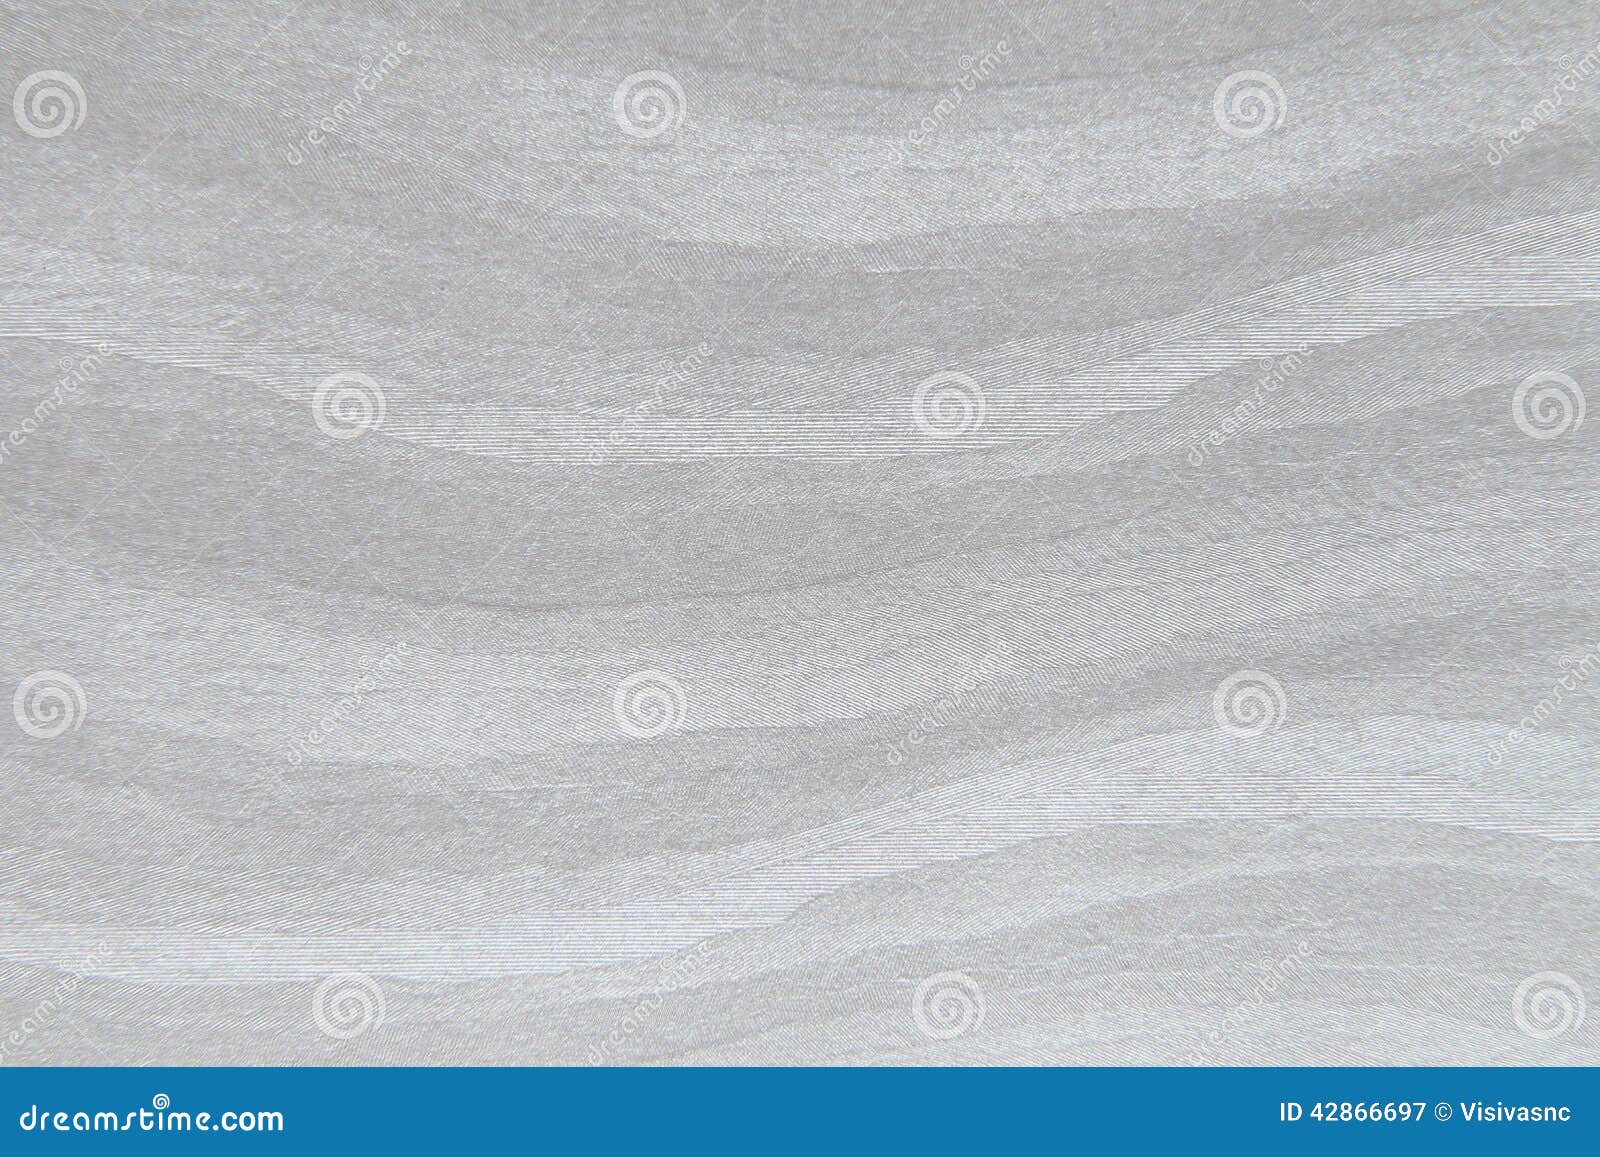 textured paper background with gray silver surface effects